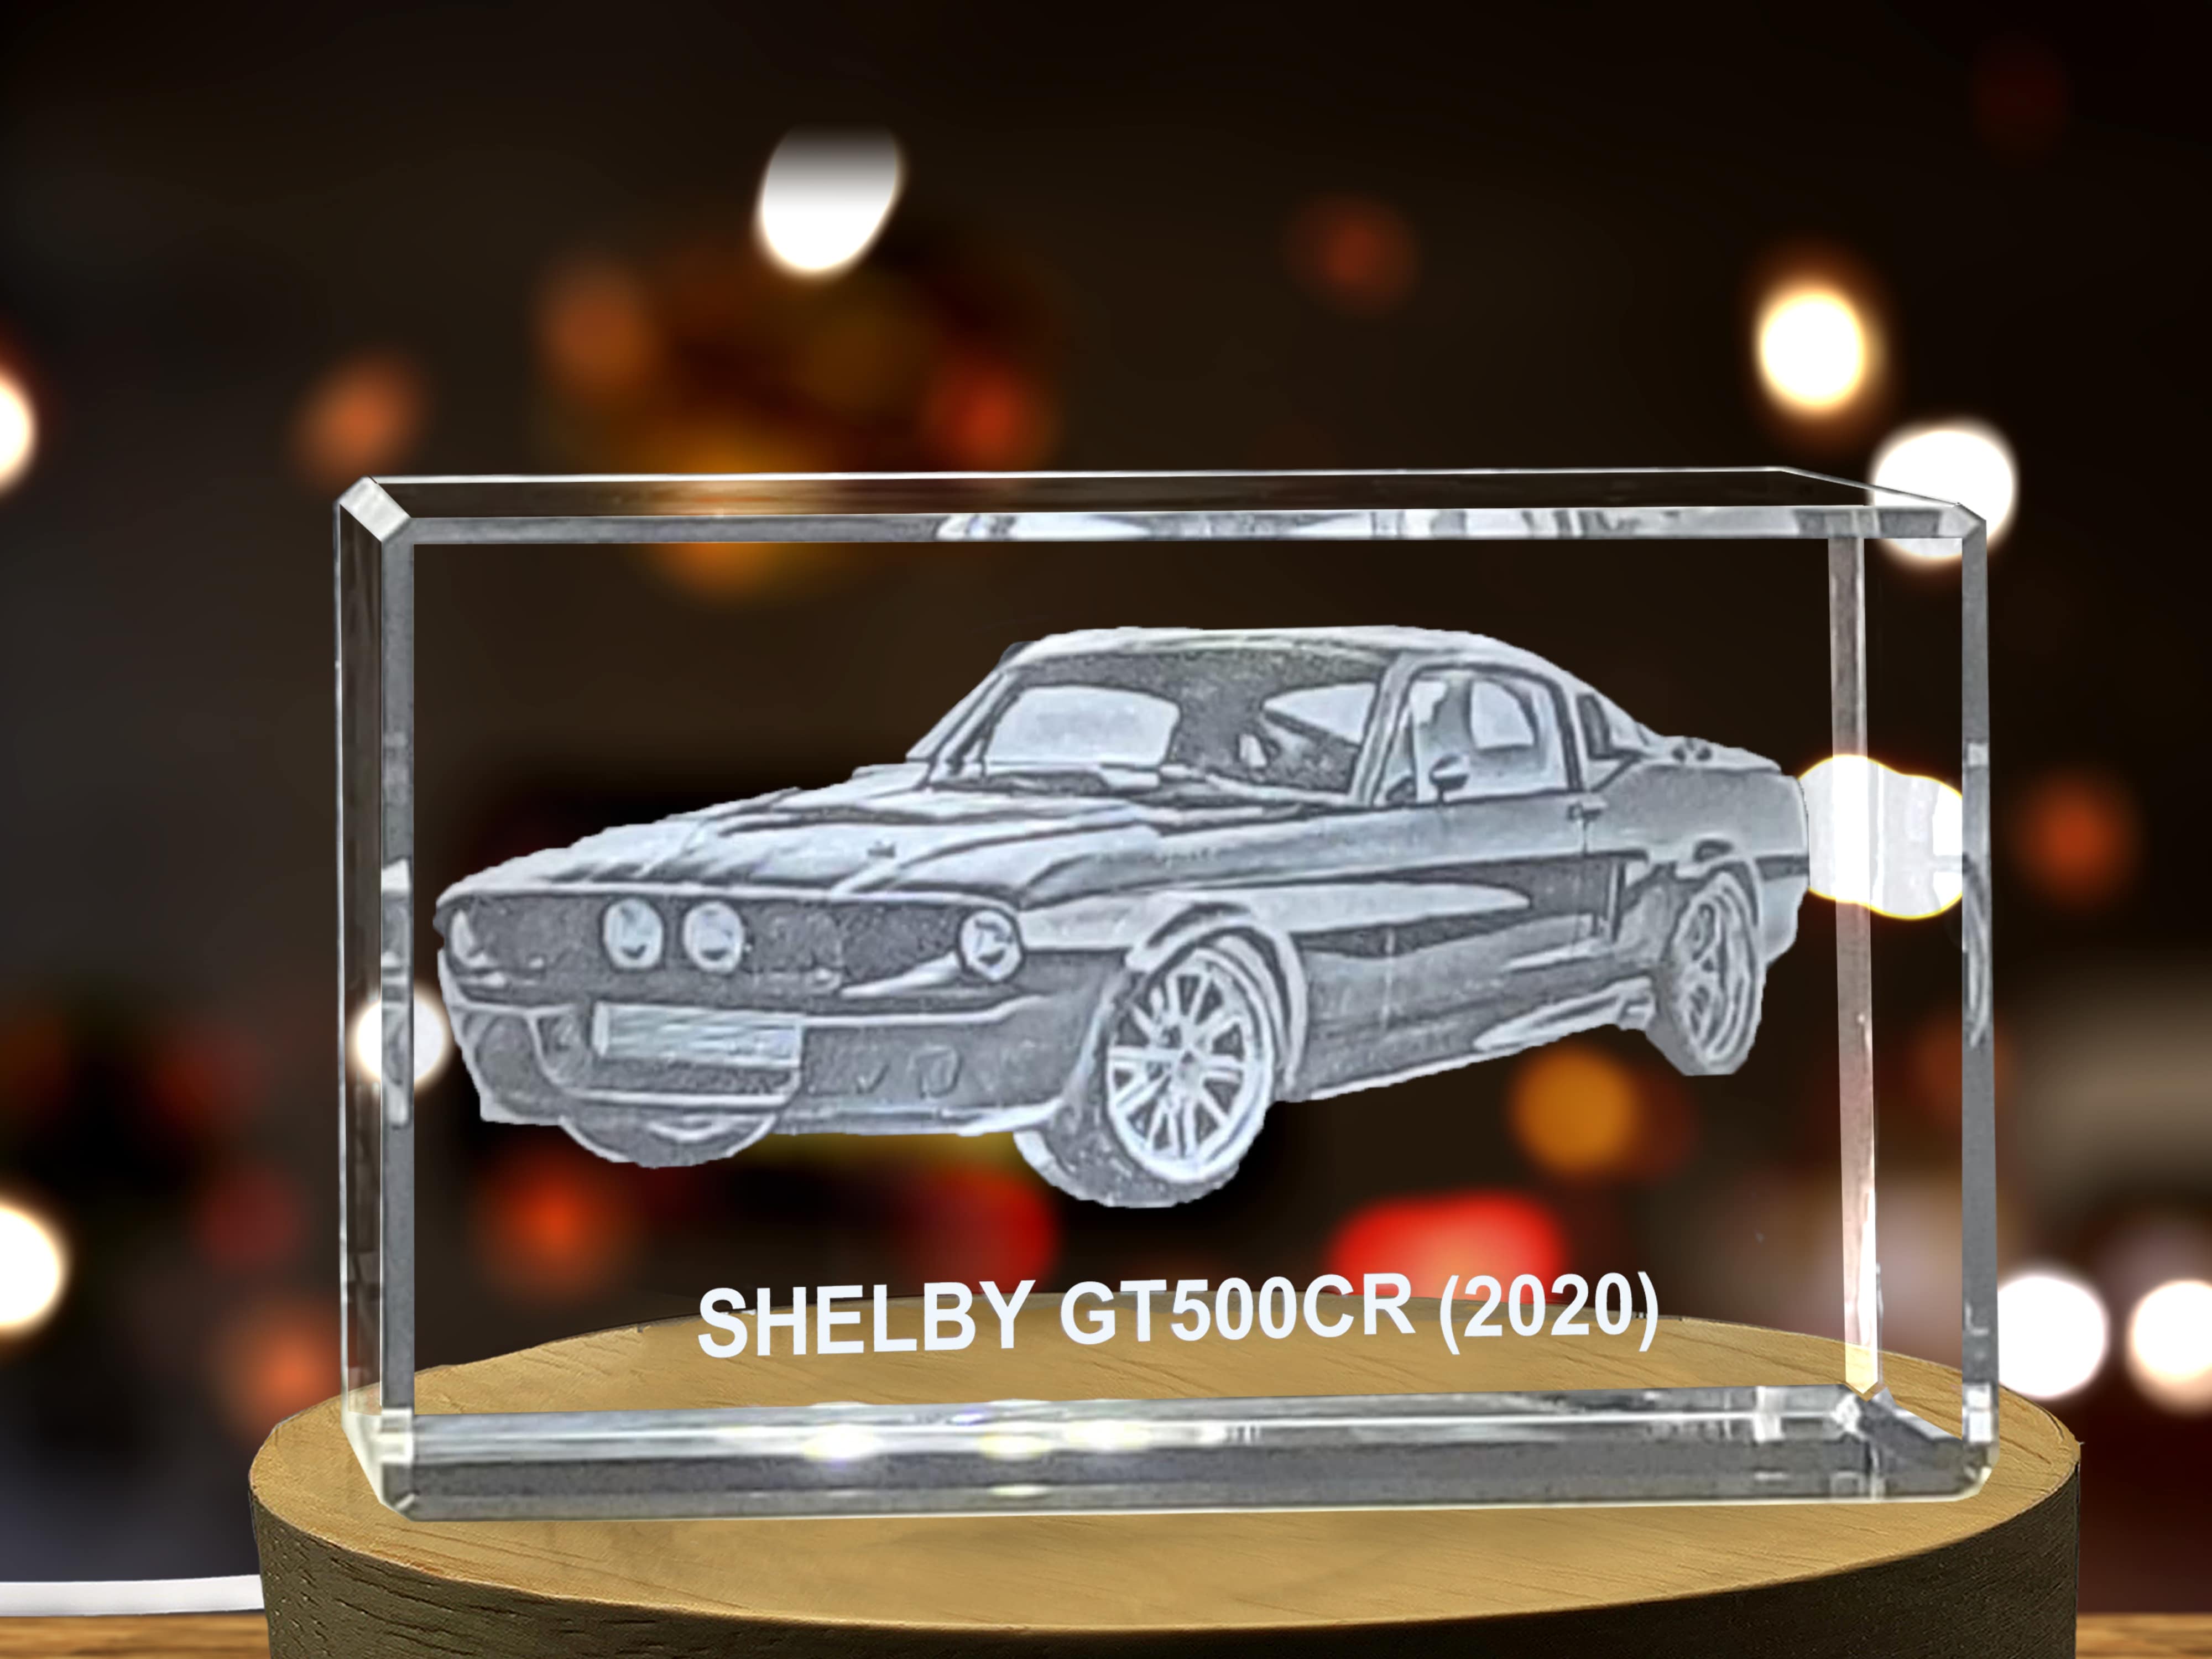 Exquisite 3D Engraved Crystal of the 2020 Shelby GT500CR Supercar A&B Crystal Collection